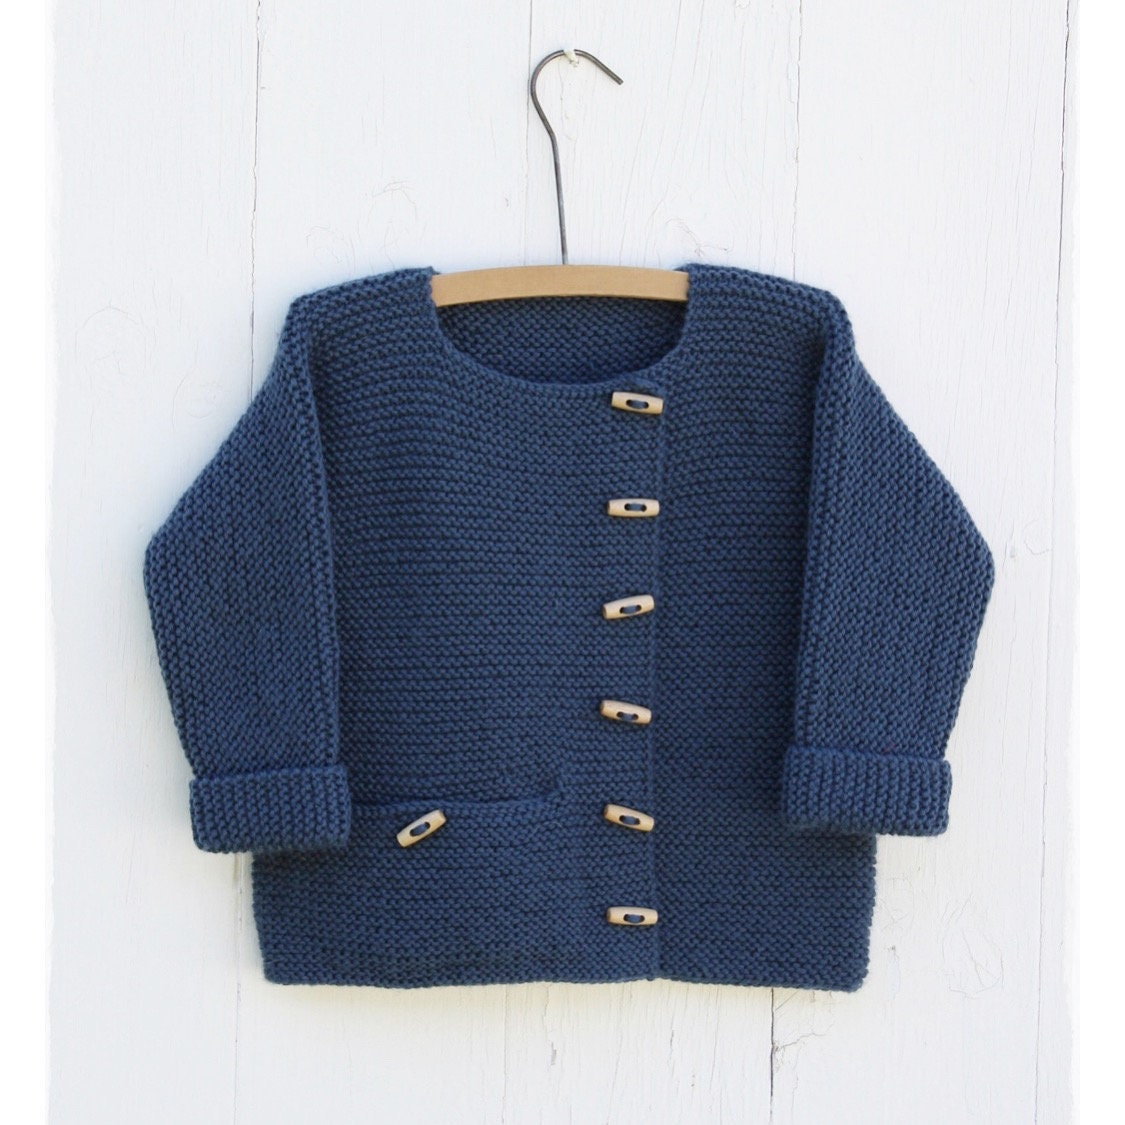 Child Cardigan Knitting Pattern 018 (Instant Download) - Etsy